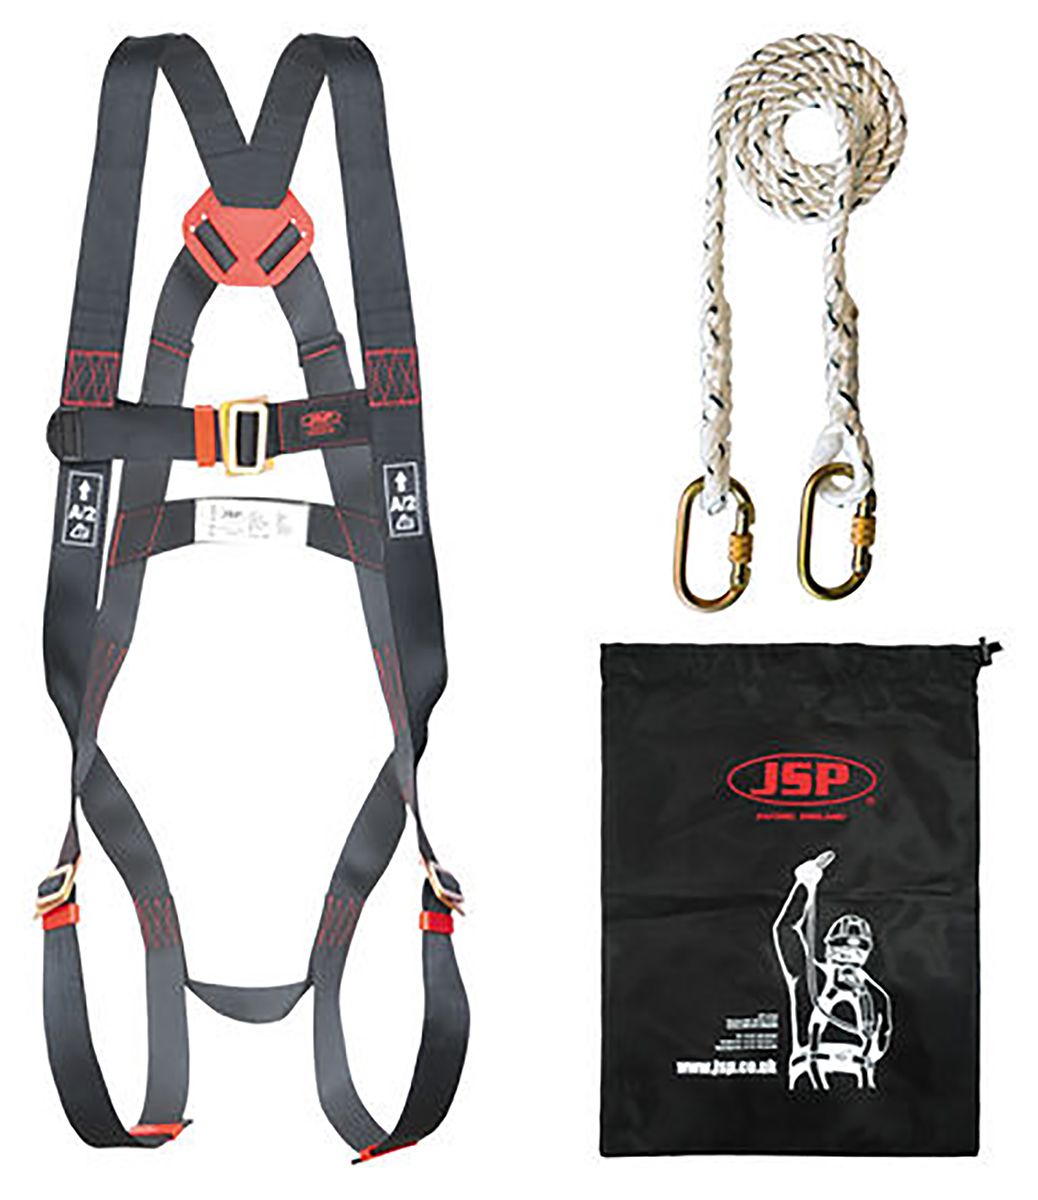 JSP Fall Arrest Kit with Draw String Bag, Harness, Lanyard